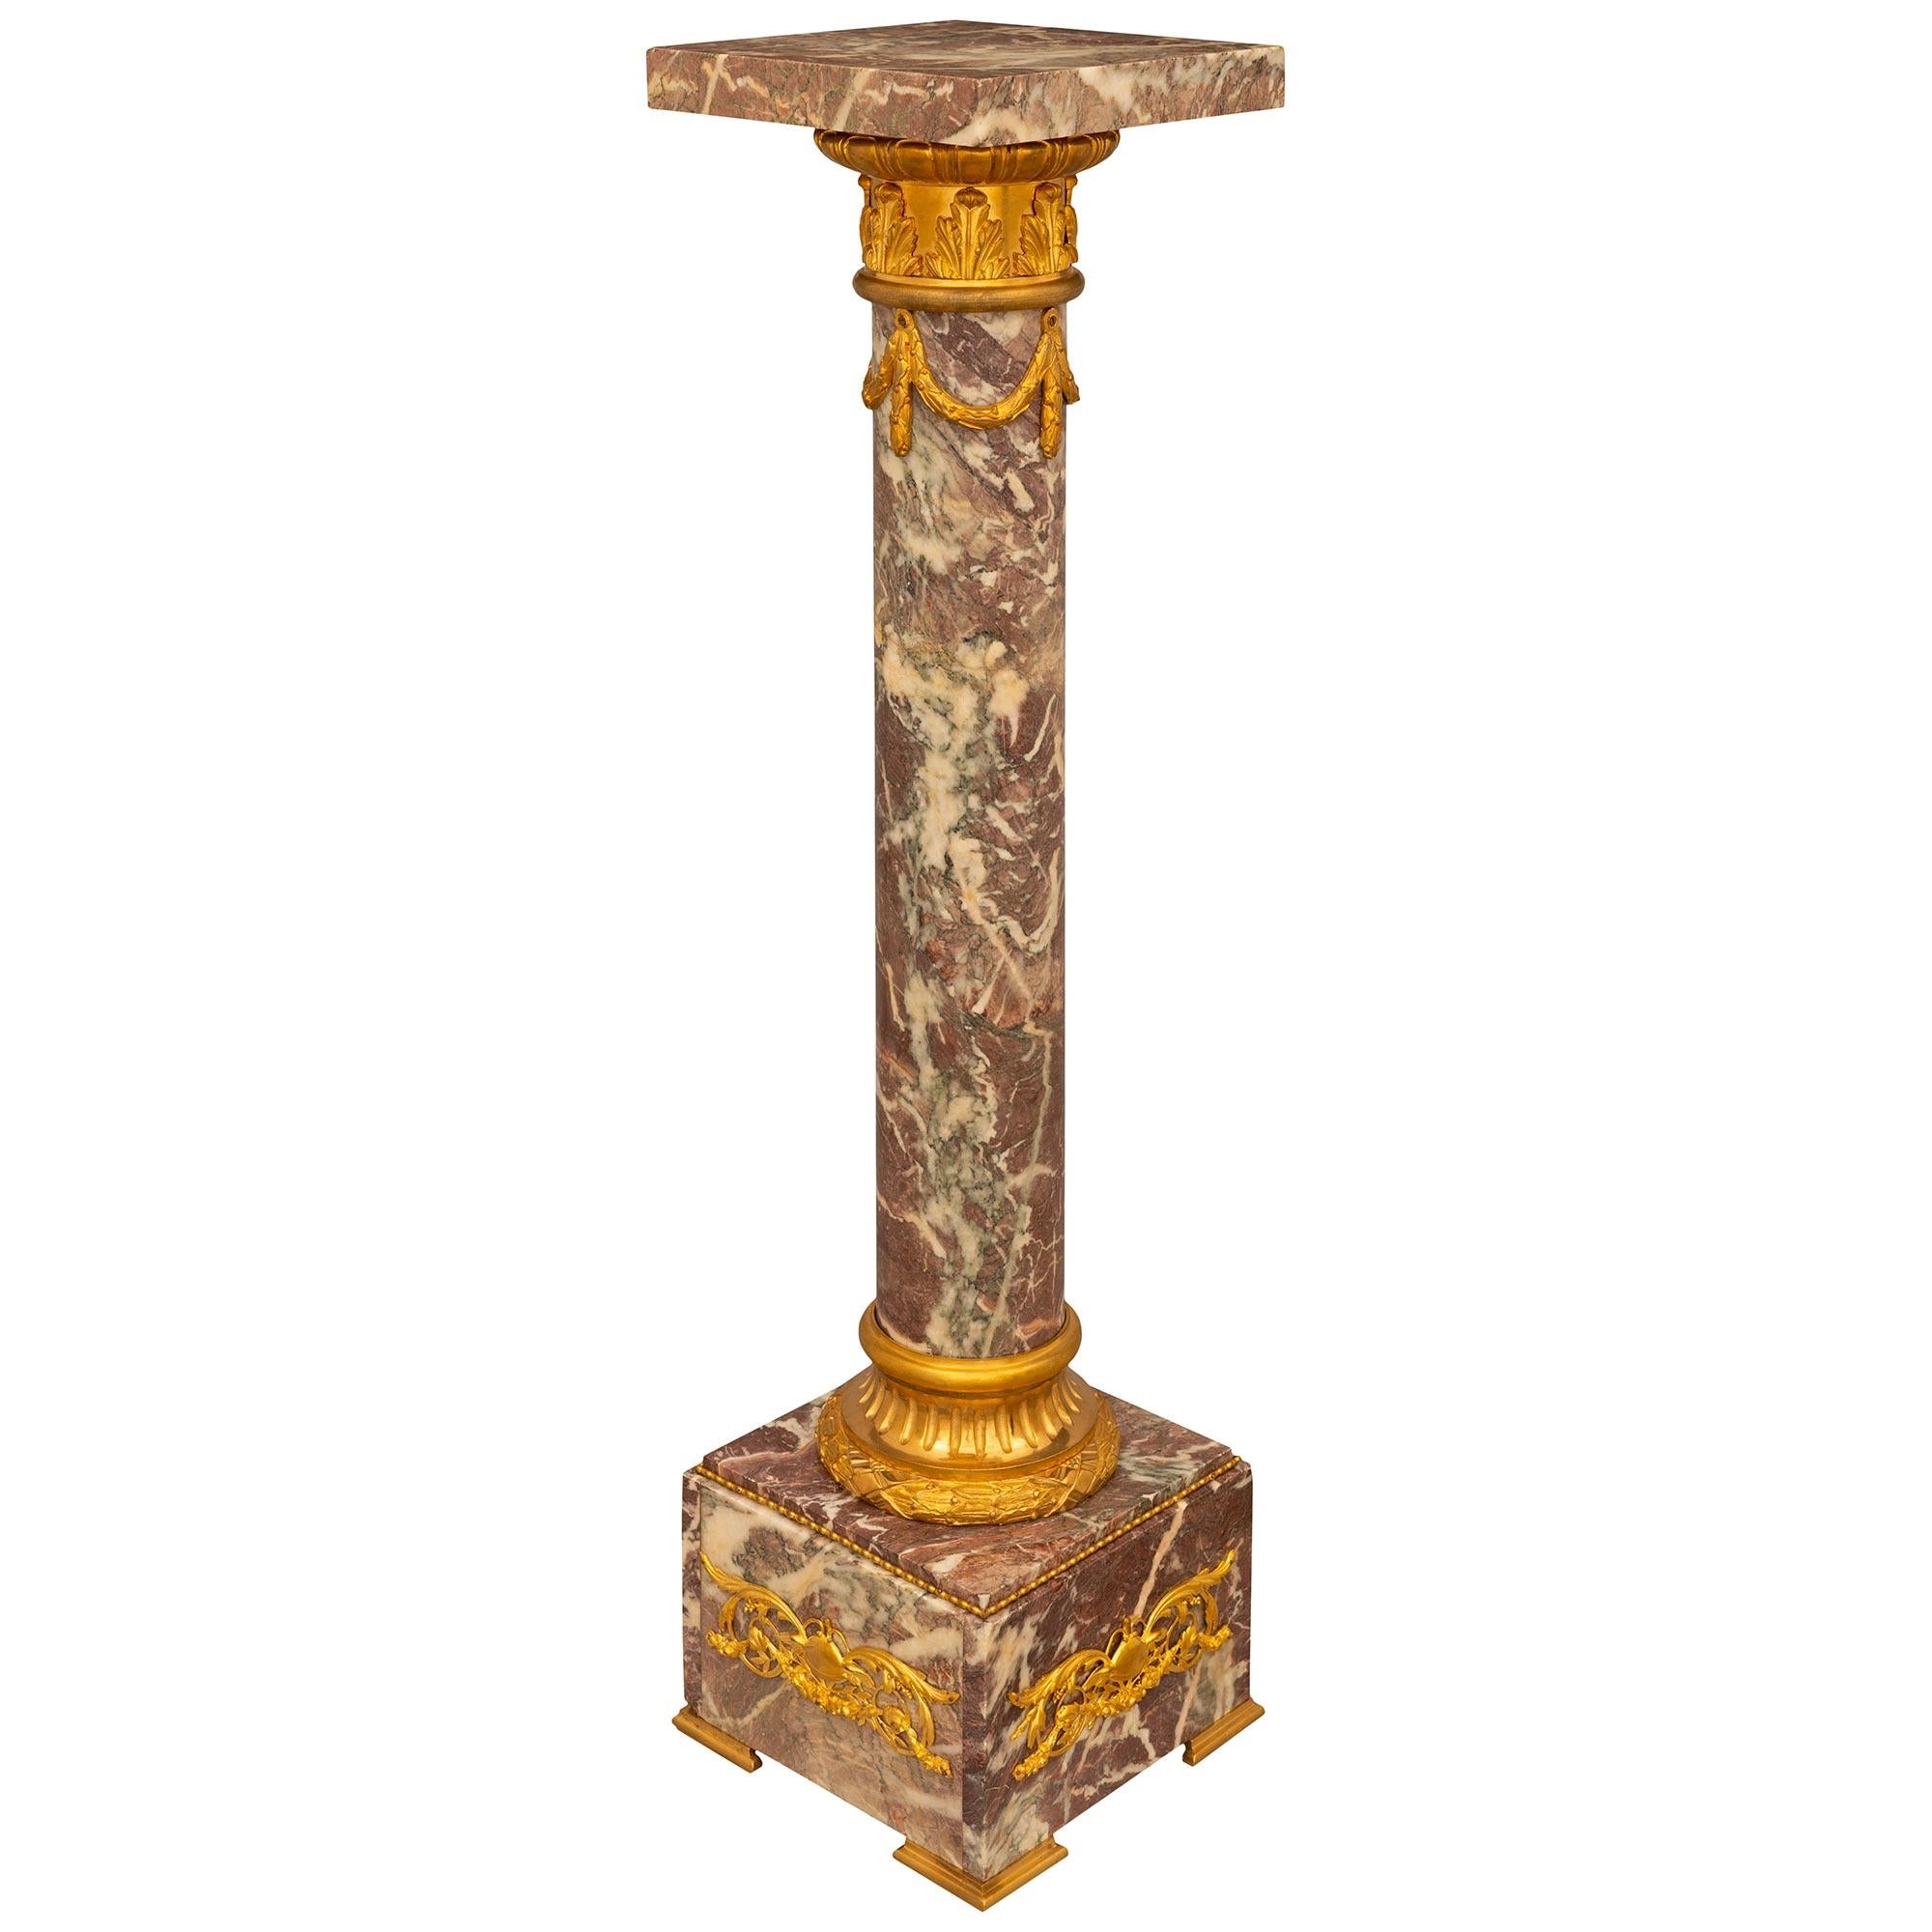 French 19th Century Louis XVI Style Marble and Ormolu Pedestal In Good Condition For Sale In West Palm Beach, FL